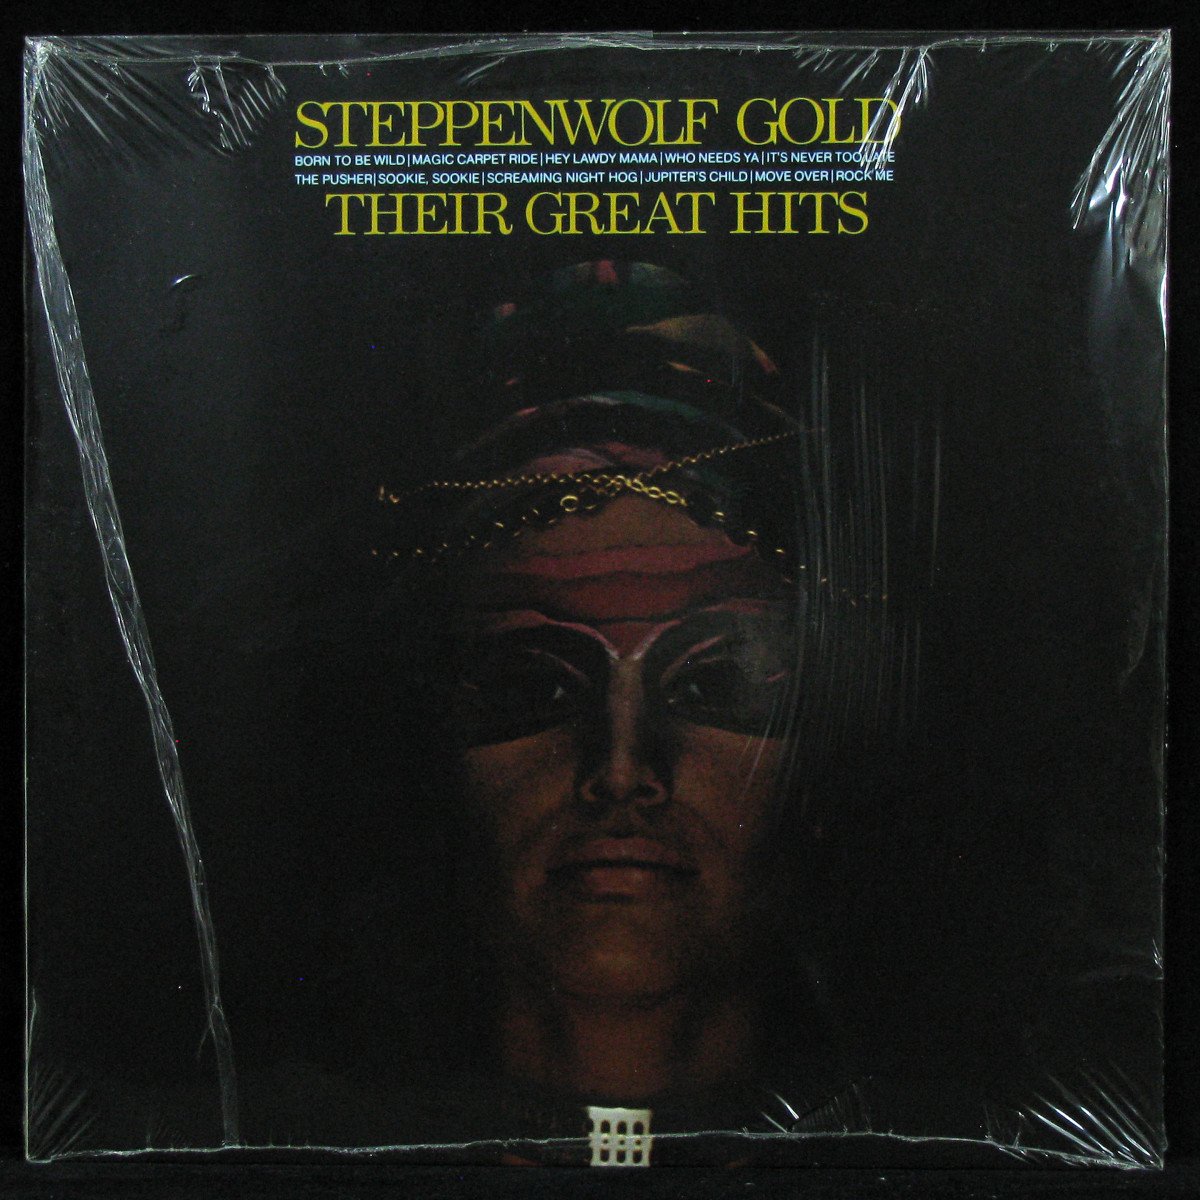 LP Steppenwolf — Gold (Their Great Hits) фото